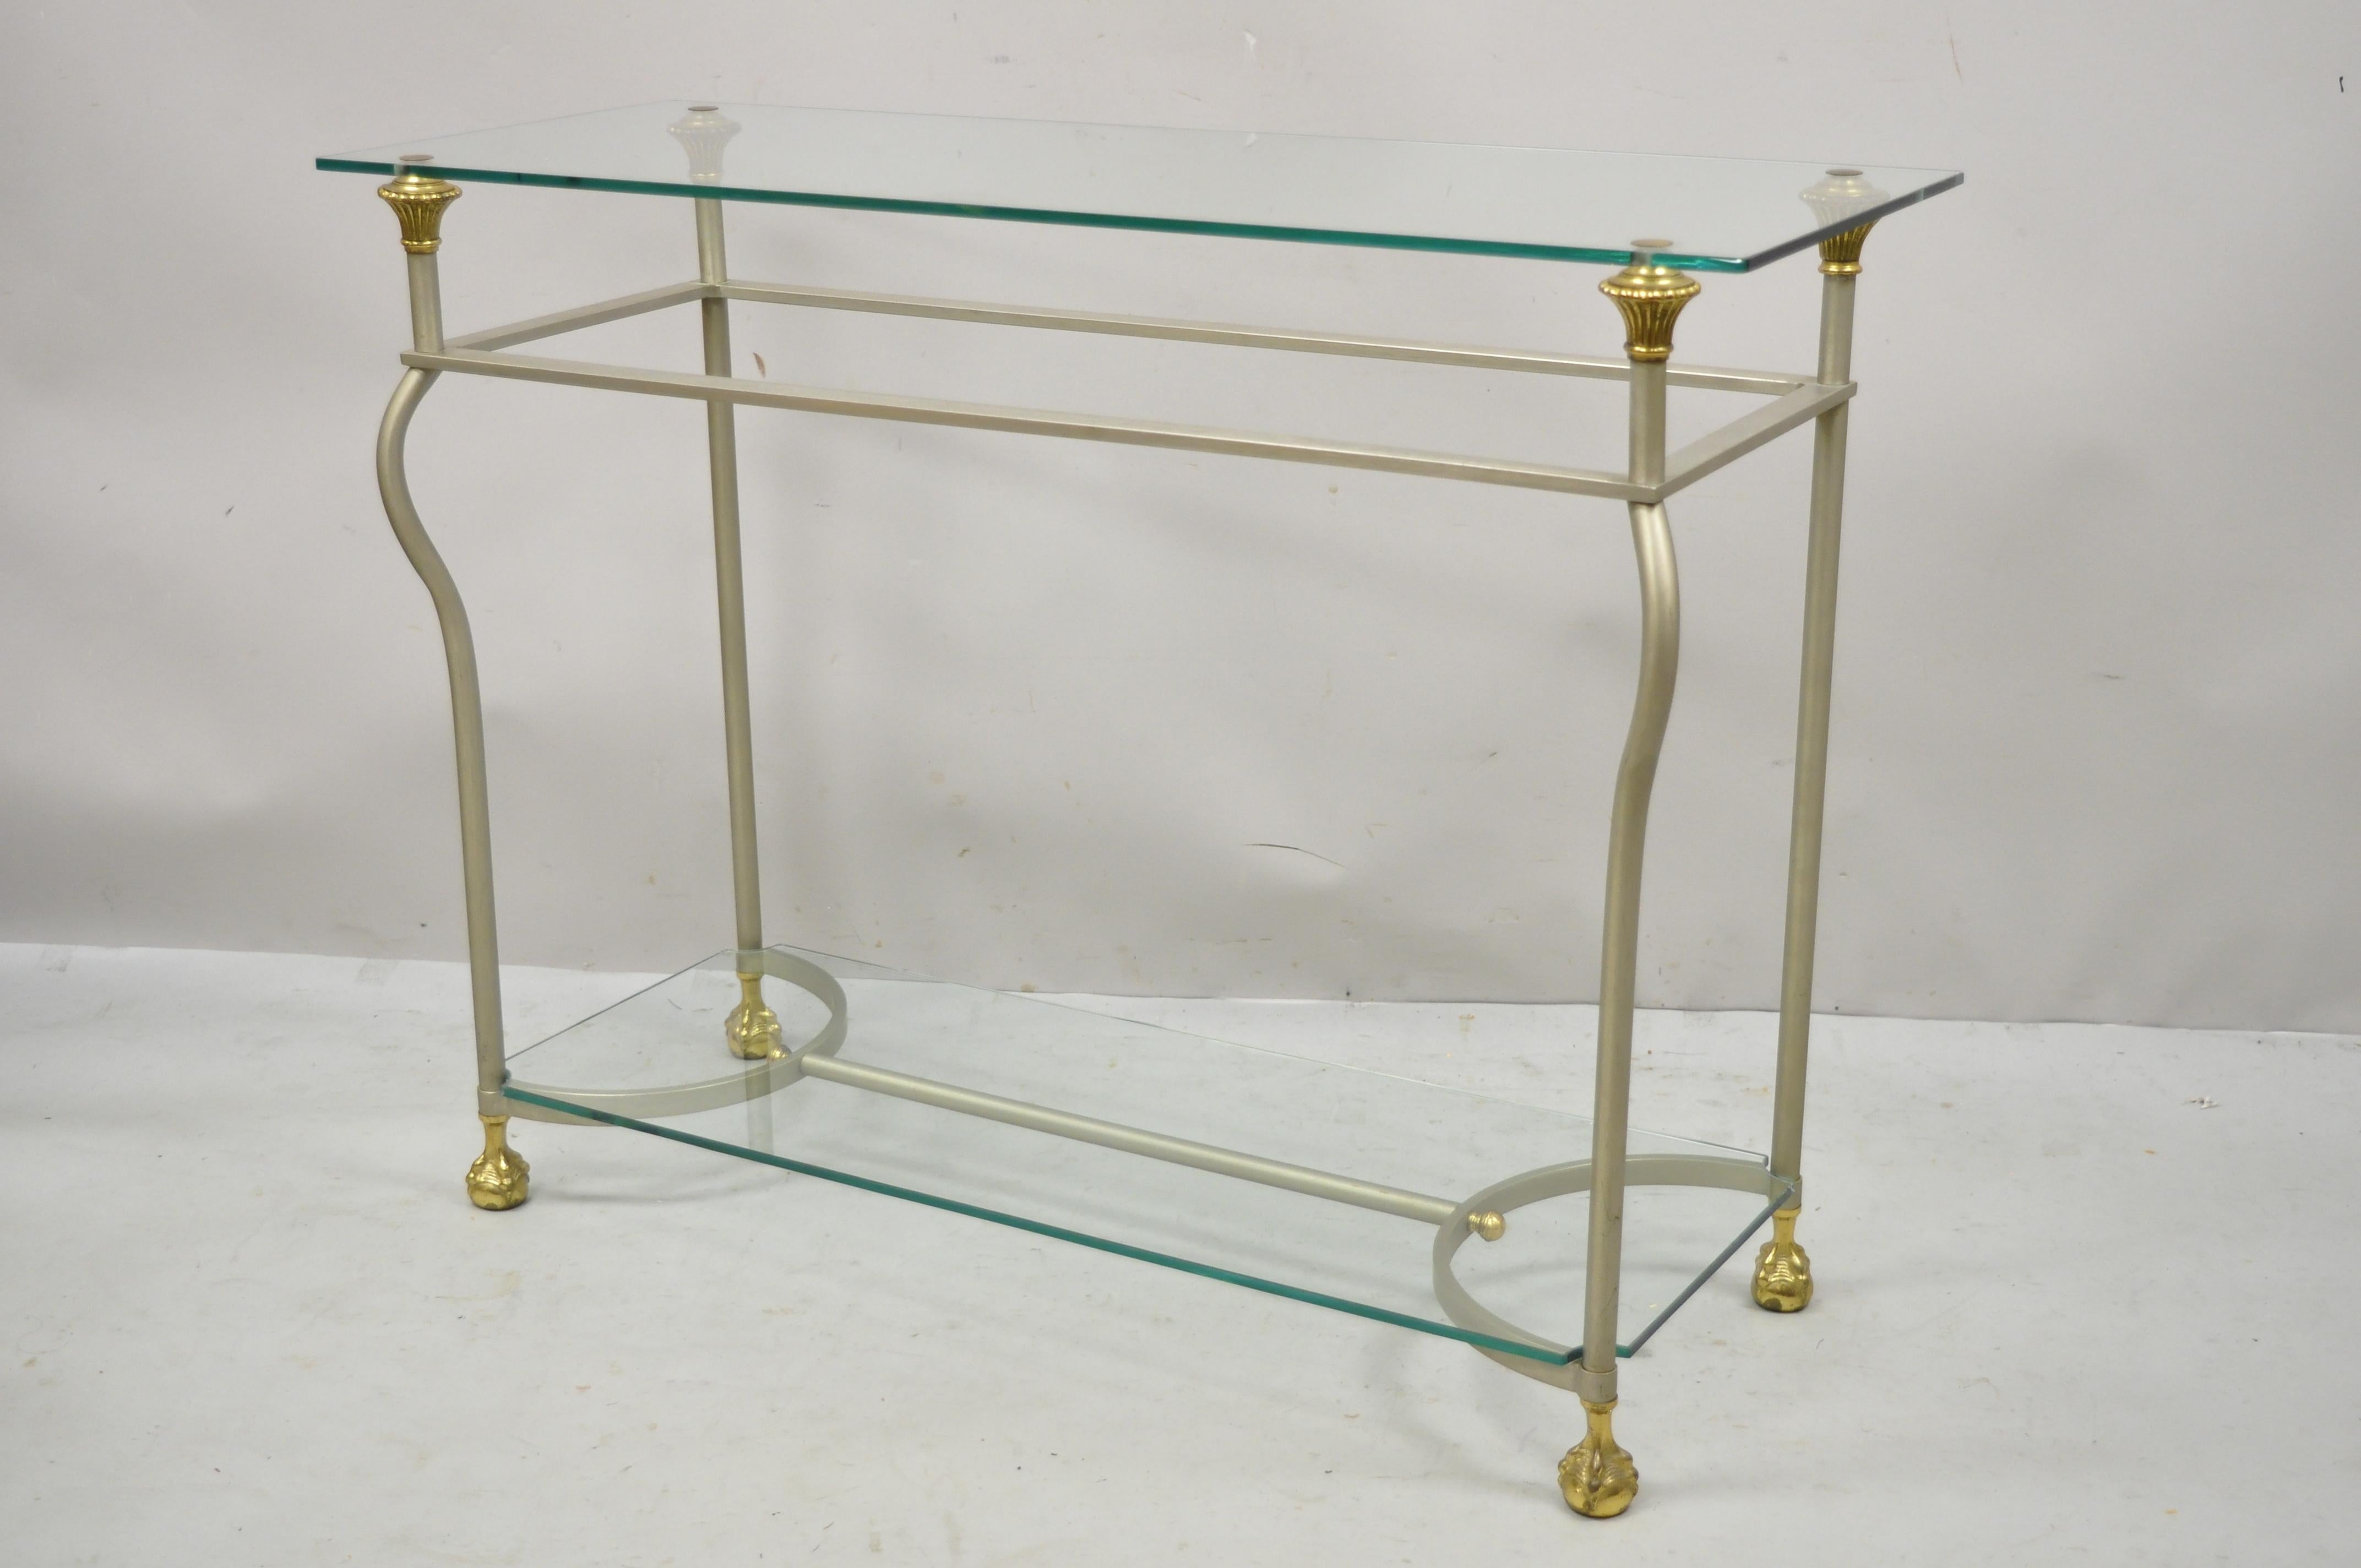 Vintage Maison Jansen attributed italian steel and brass ball and claw console sofa hall table. Item features 2 glass shelves, steel and brass frame, ball and claw brass feet, stamped 